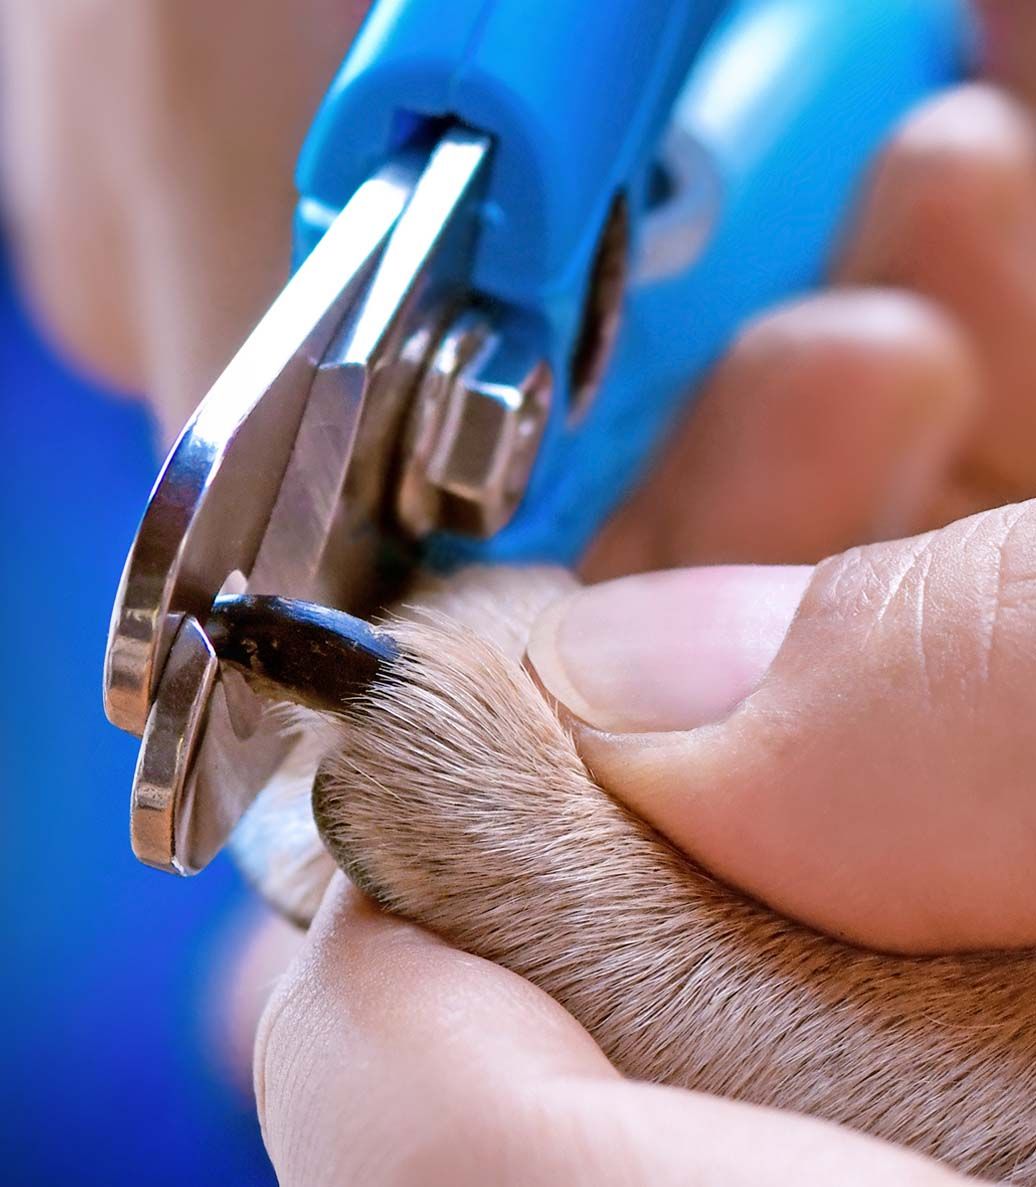 How to Cut Dog Nails and Why Its Important | Petco